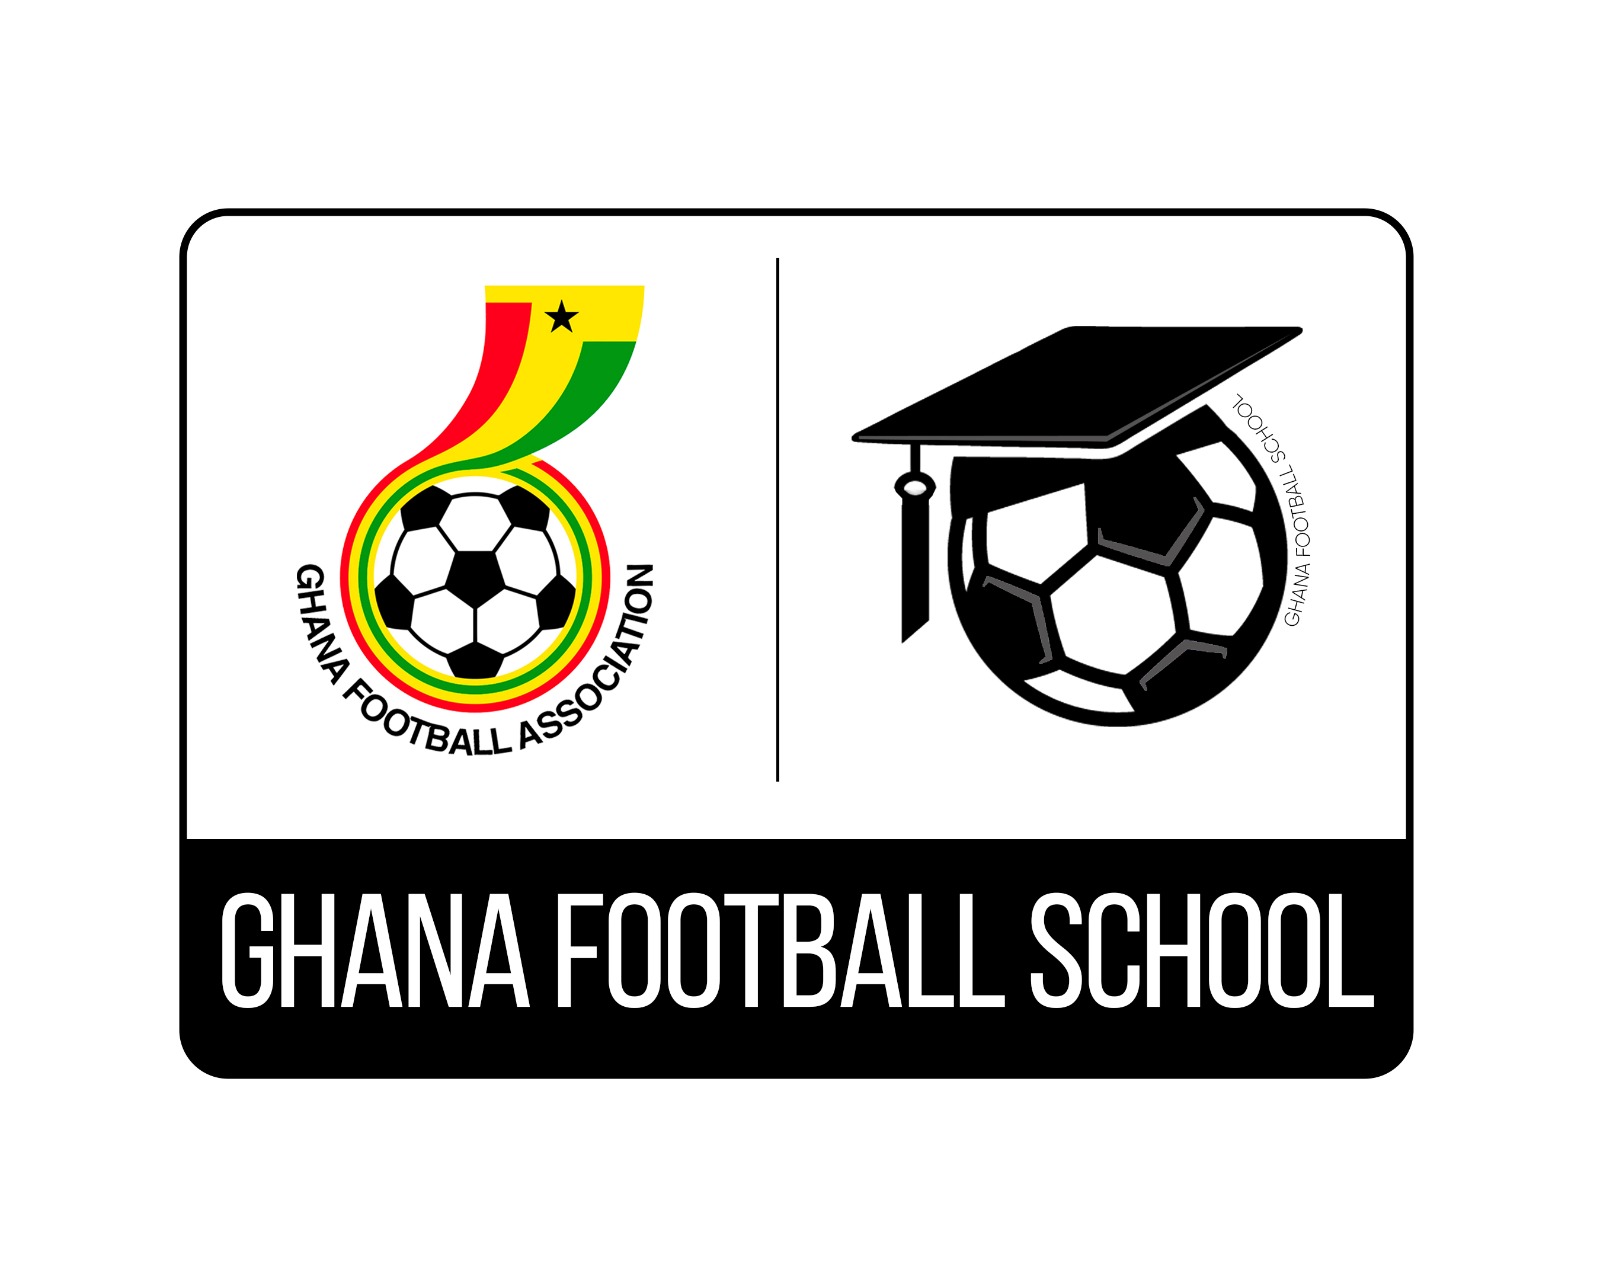 GFA set to organize Team Managers & Club Communication Managers Course